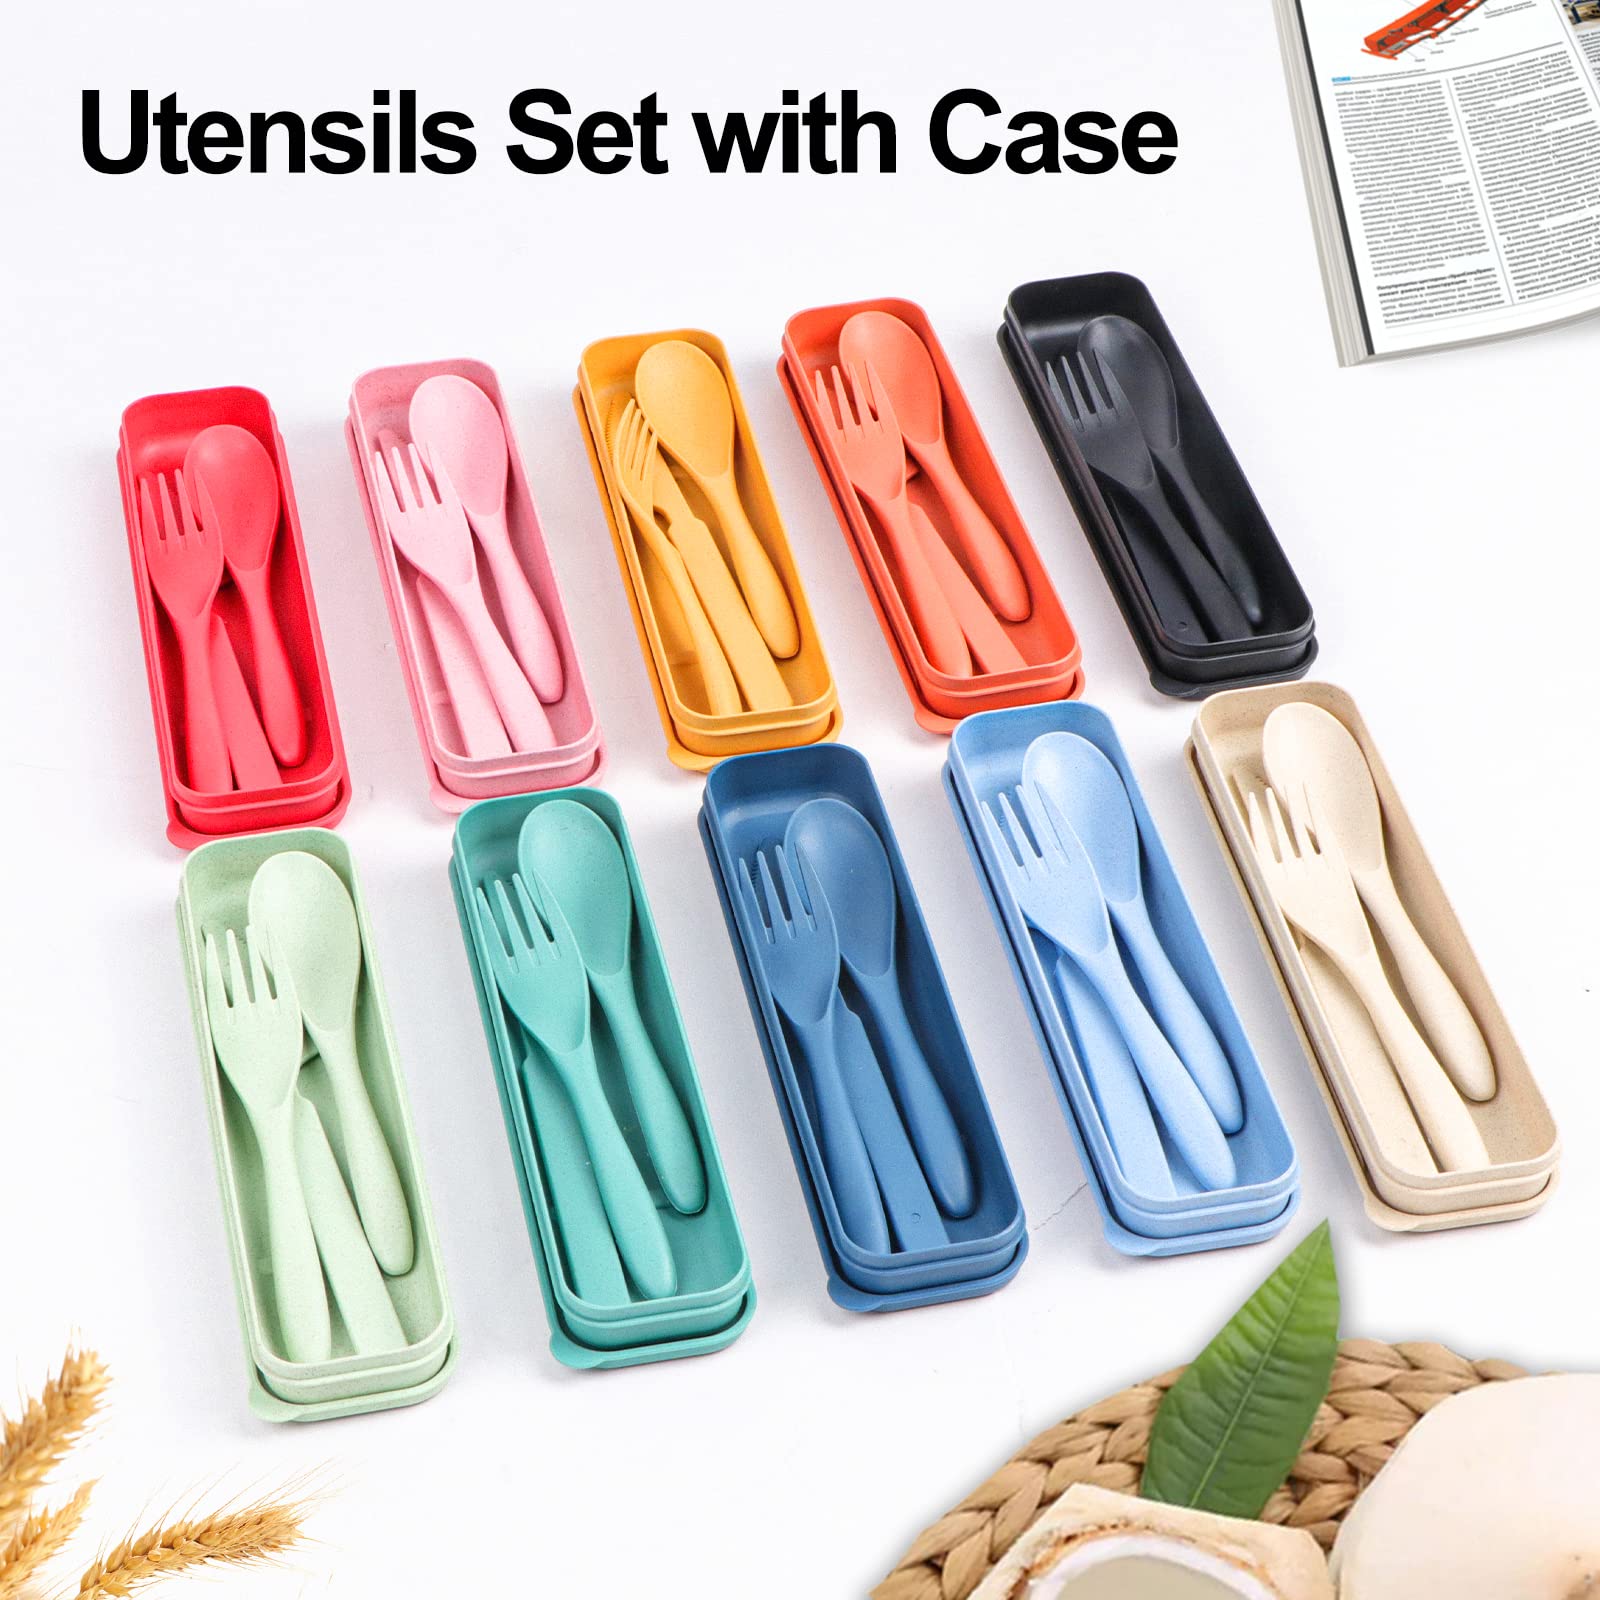 Reusable Travel Utensils Set with Case, 10 Sets Wheat Straw Portable Knife Fork Spoons Tableware, Eco-Friendly BPA Free Plastic Cutlery Travel Picnic Camping Utensils for Kids Adults Daily Use